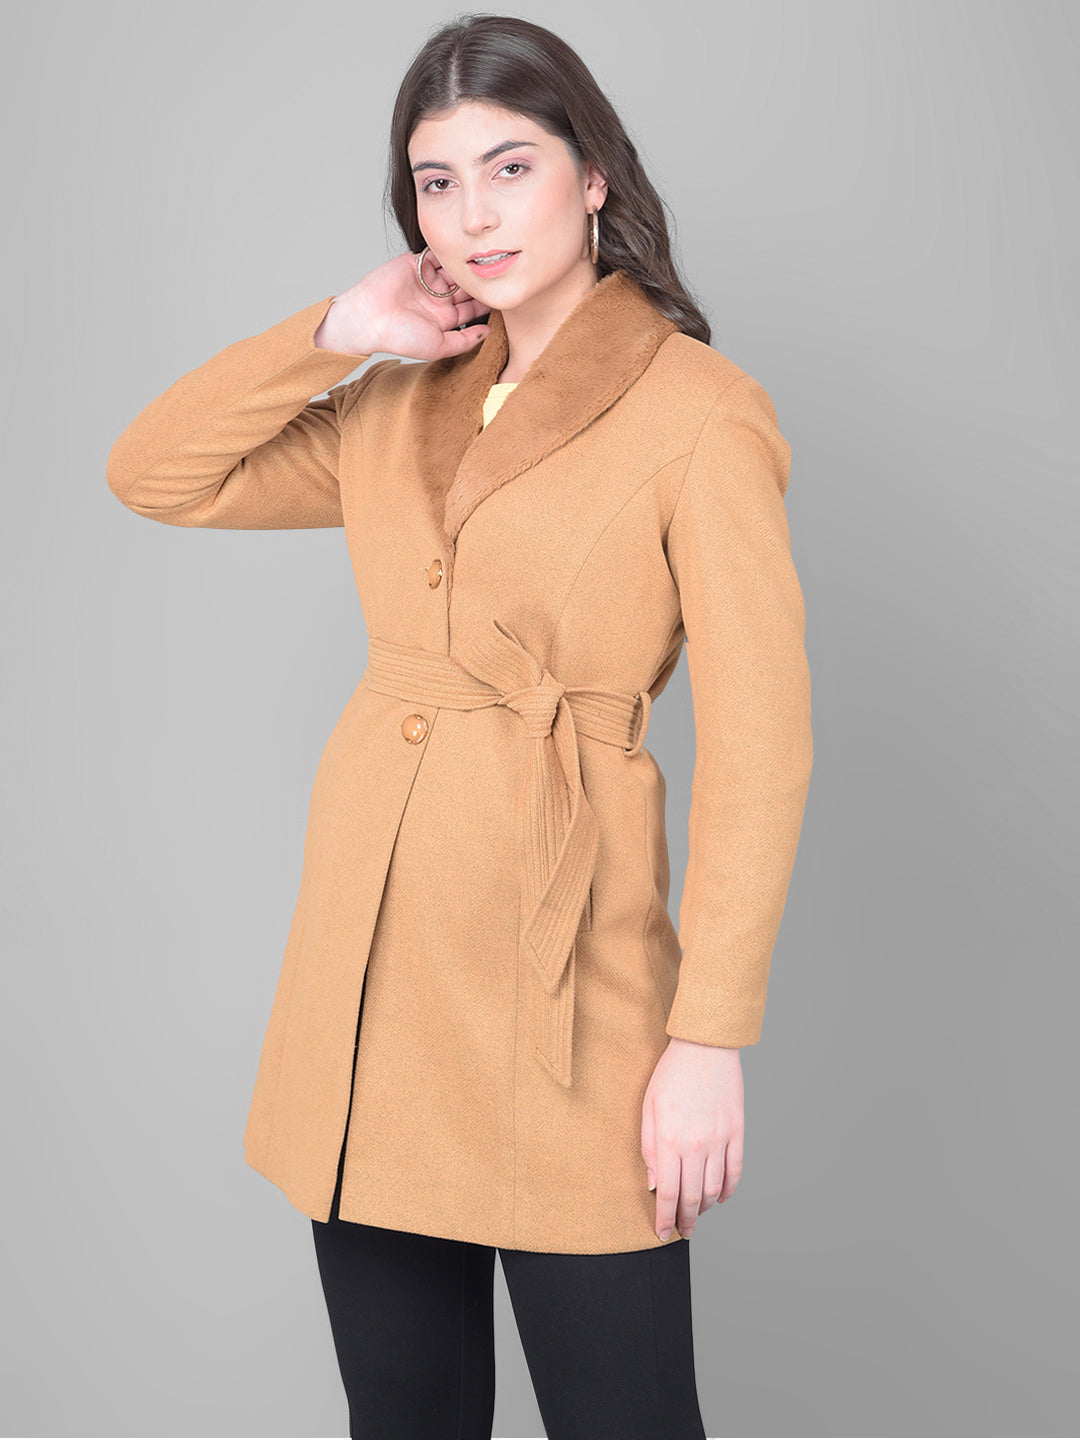 Brown Single Breasted Trench Coat-Women Coats-Crimsoune Club